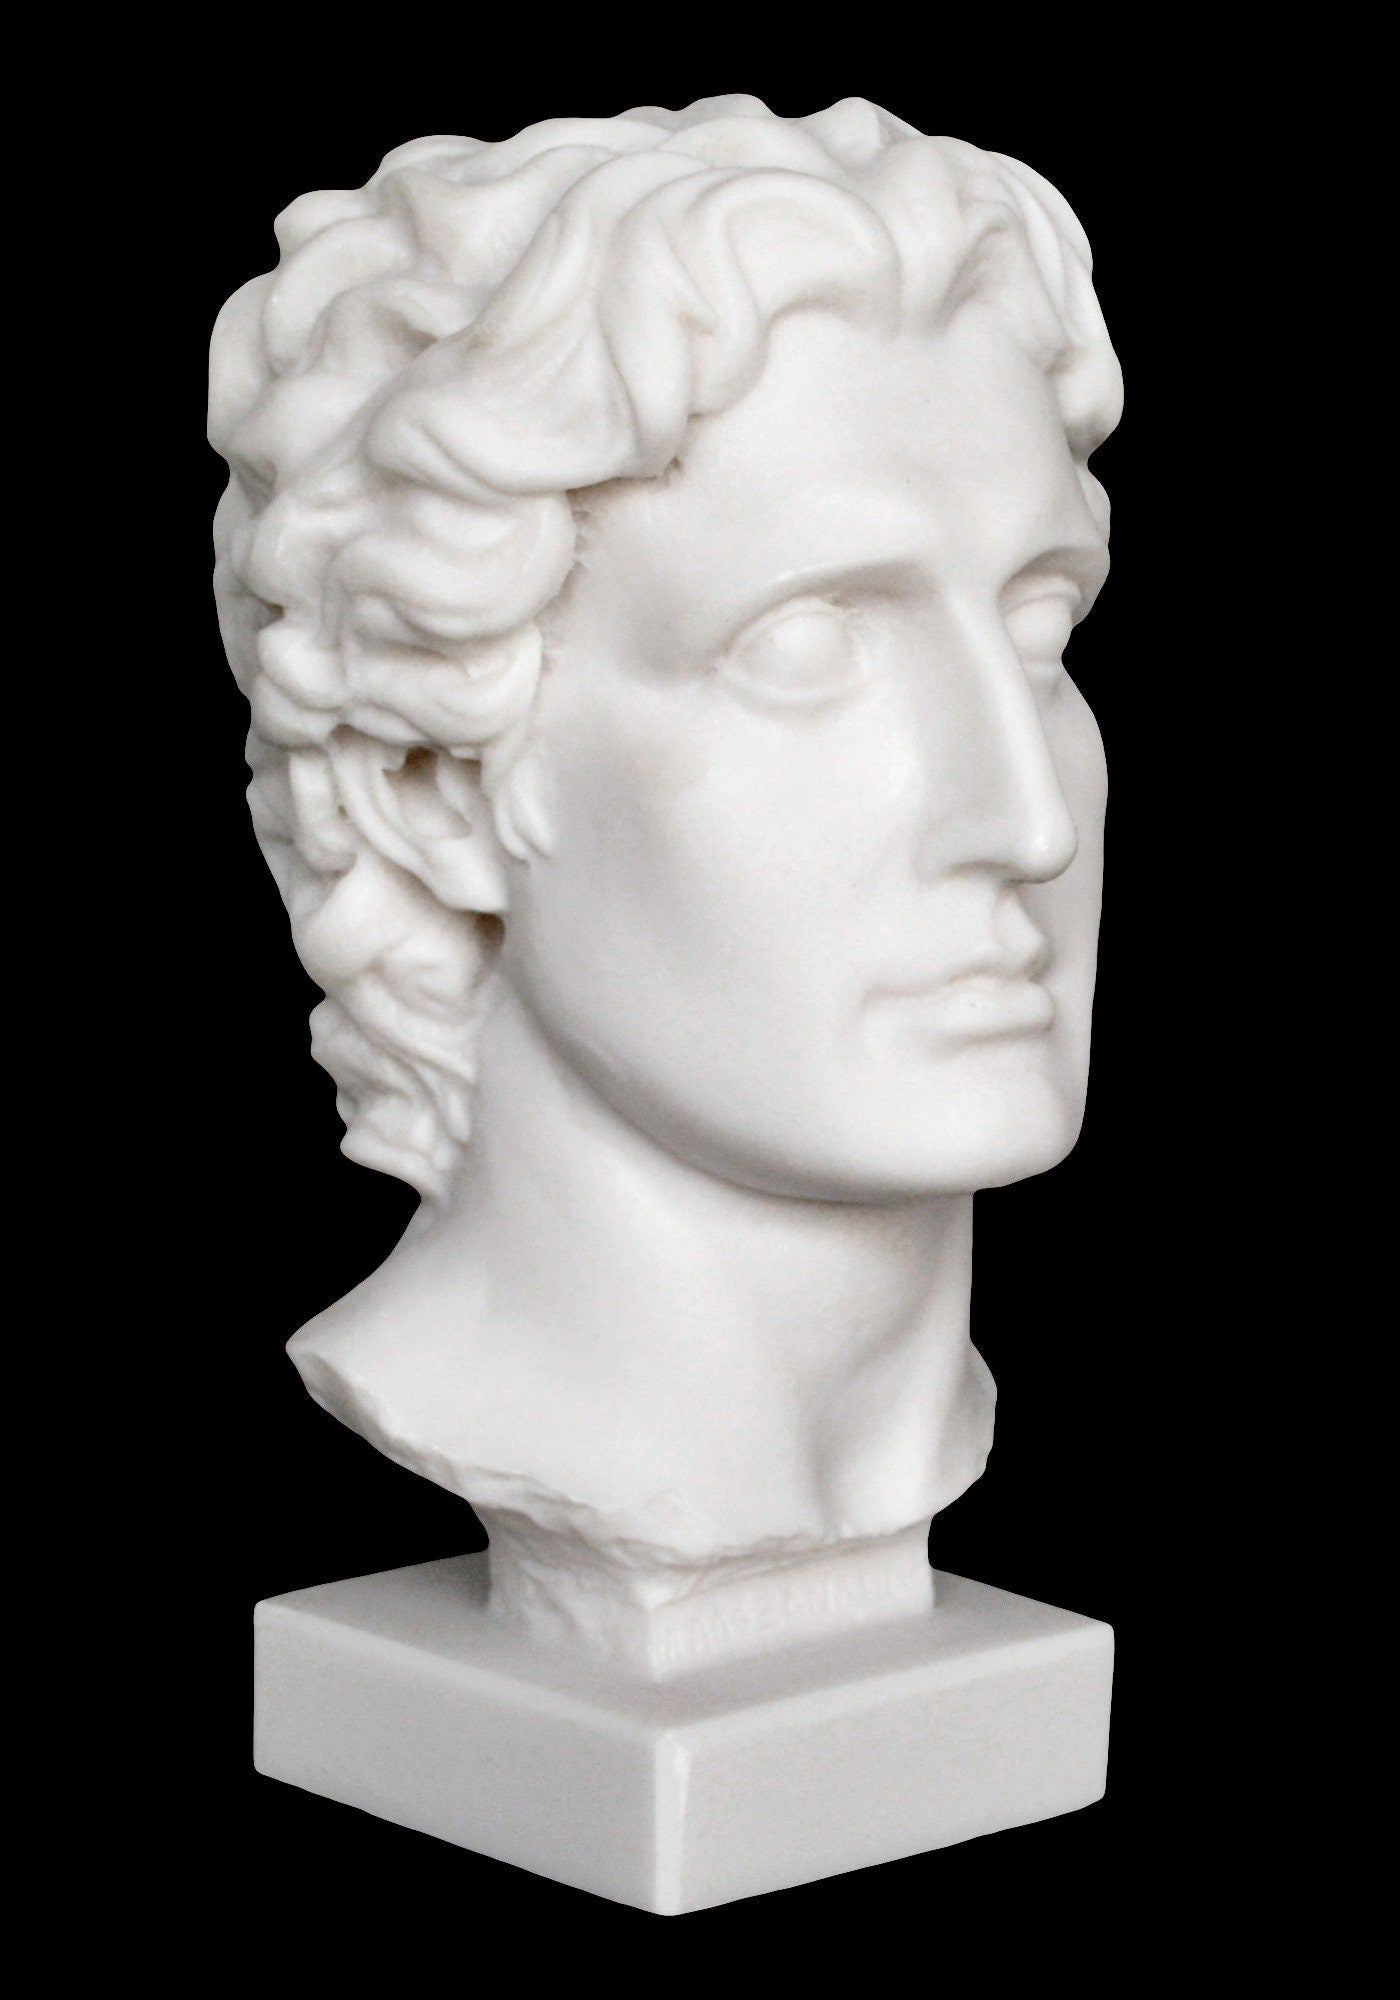 Alexander the Great - King of Macedon - 356–323 BC - Son of Philip - Visionary Leader - Alabaster Bust Sculpture